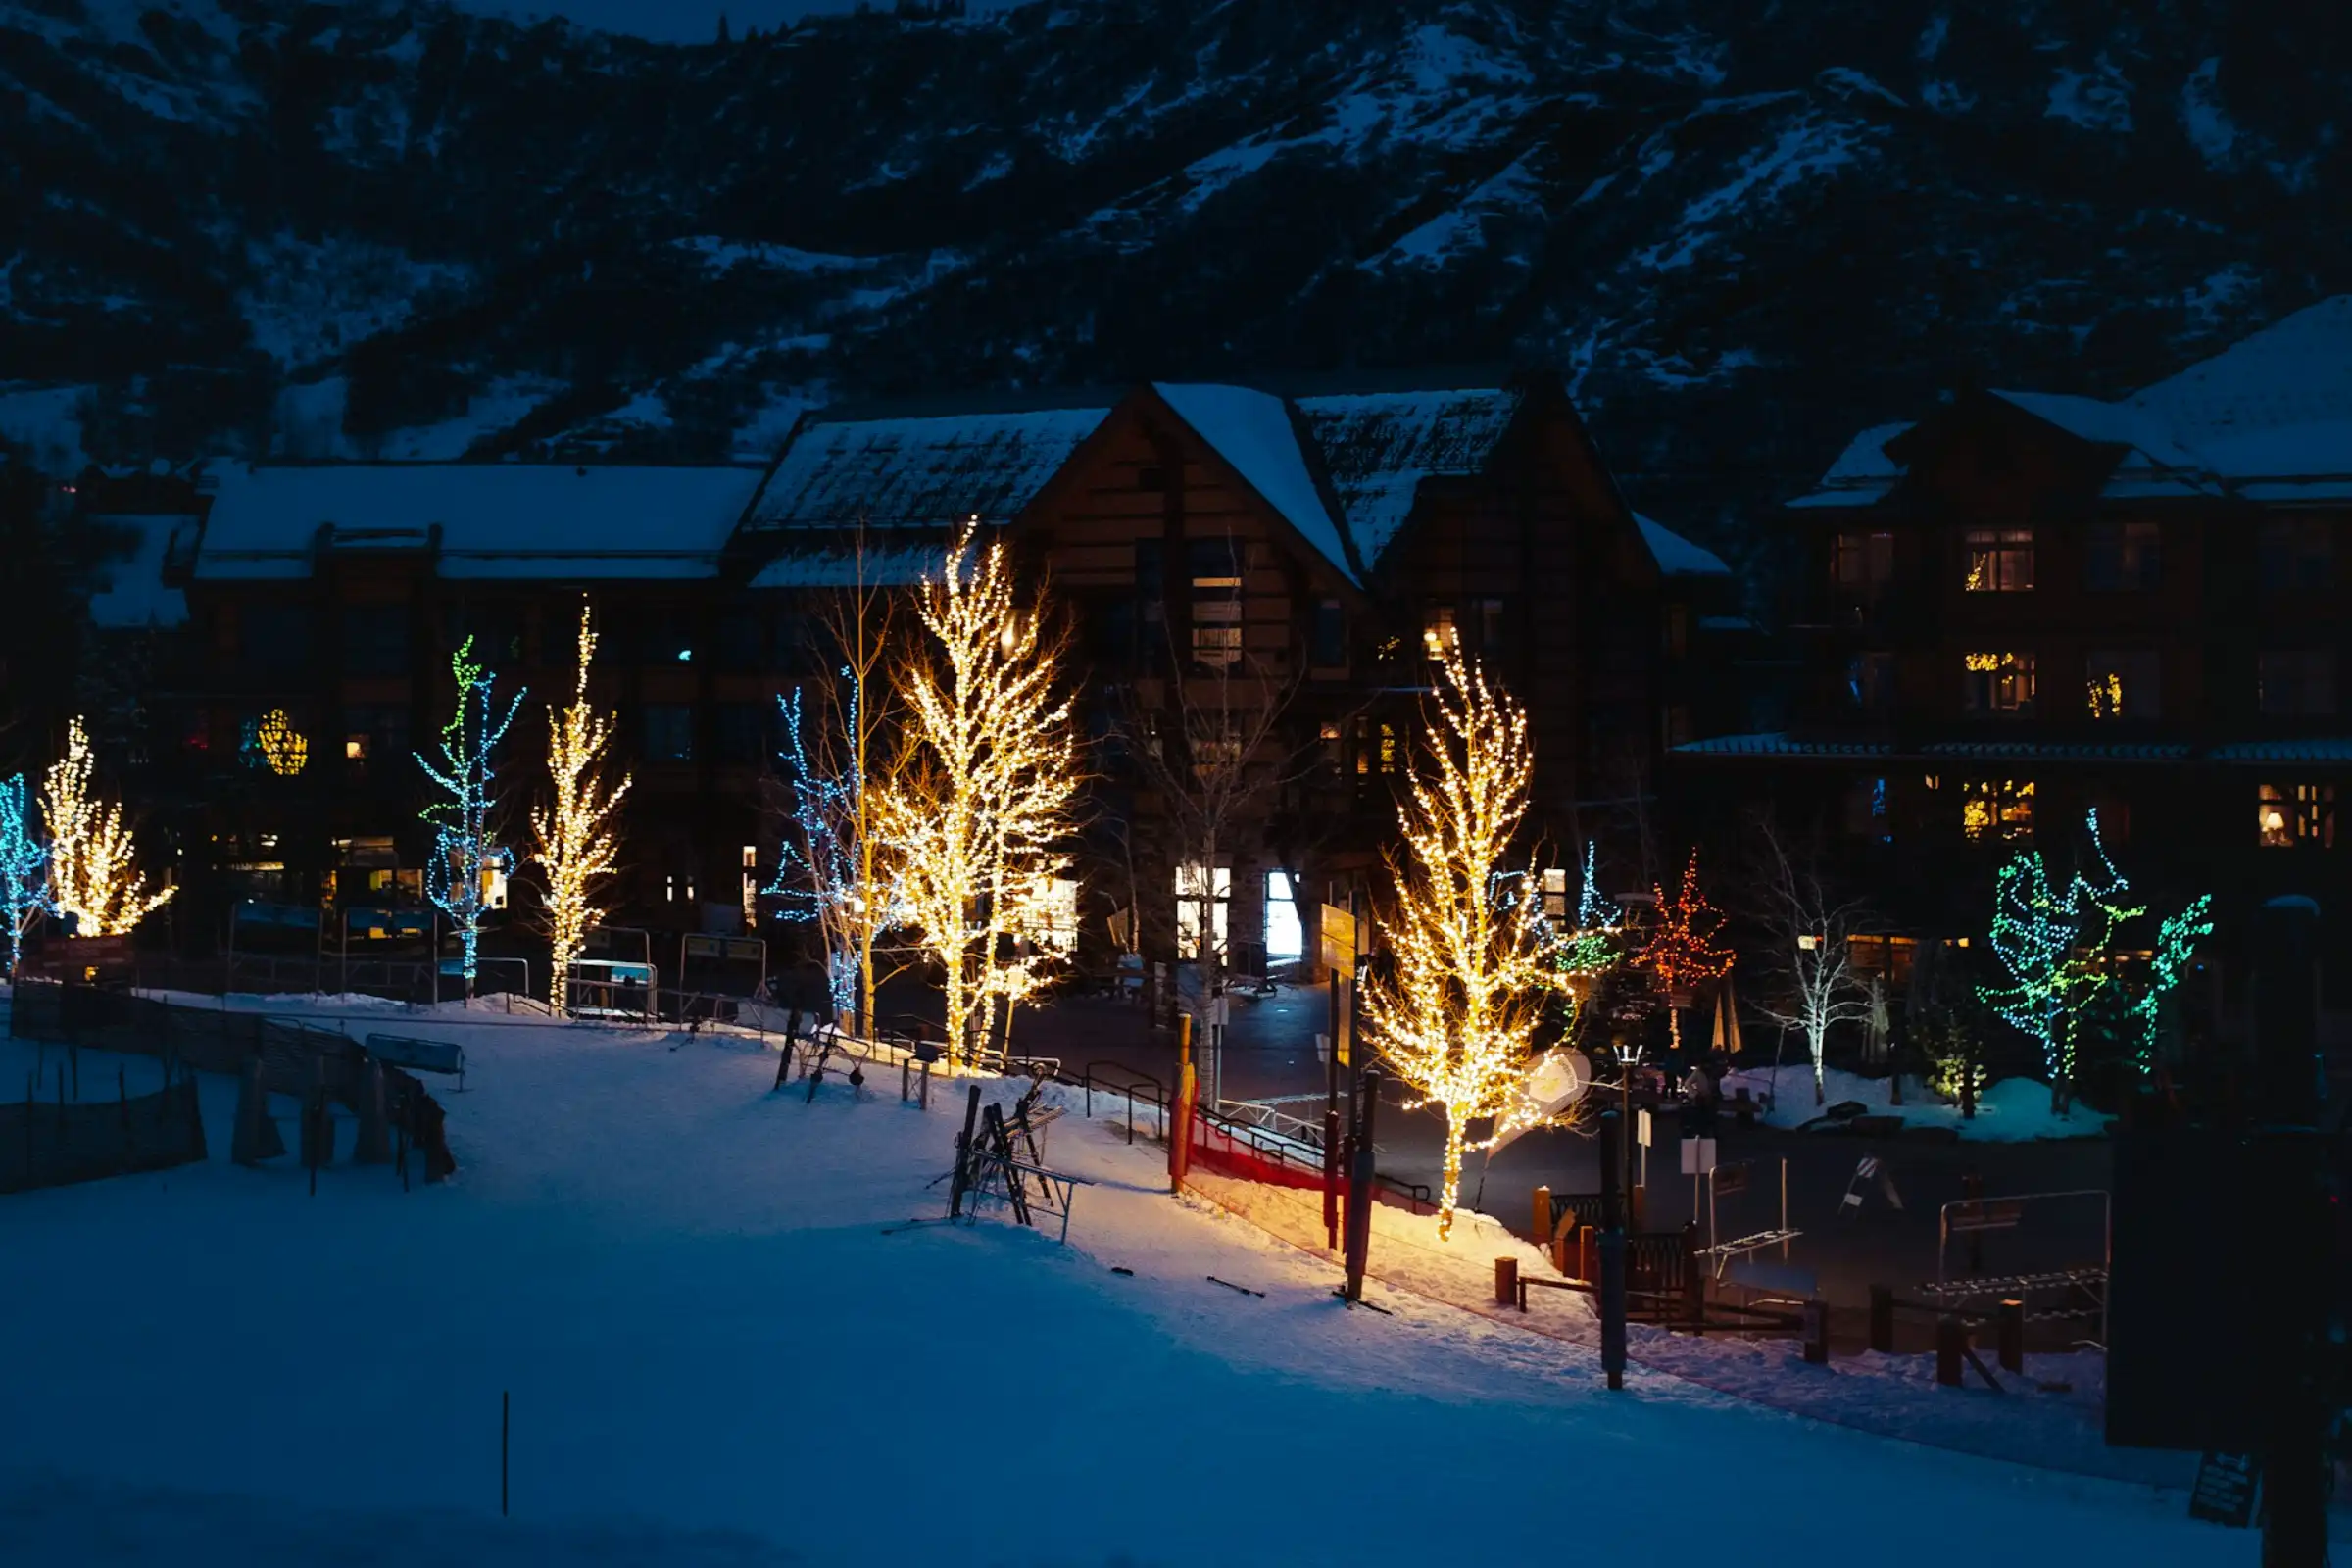 A photo from Vail Village at night